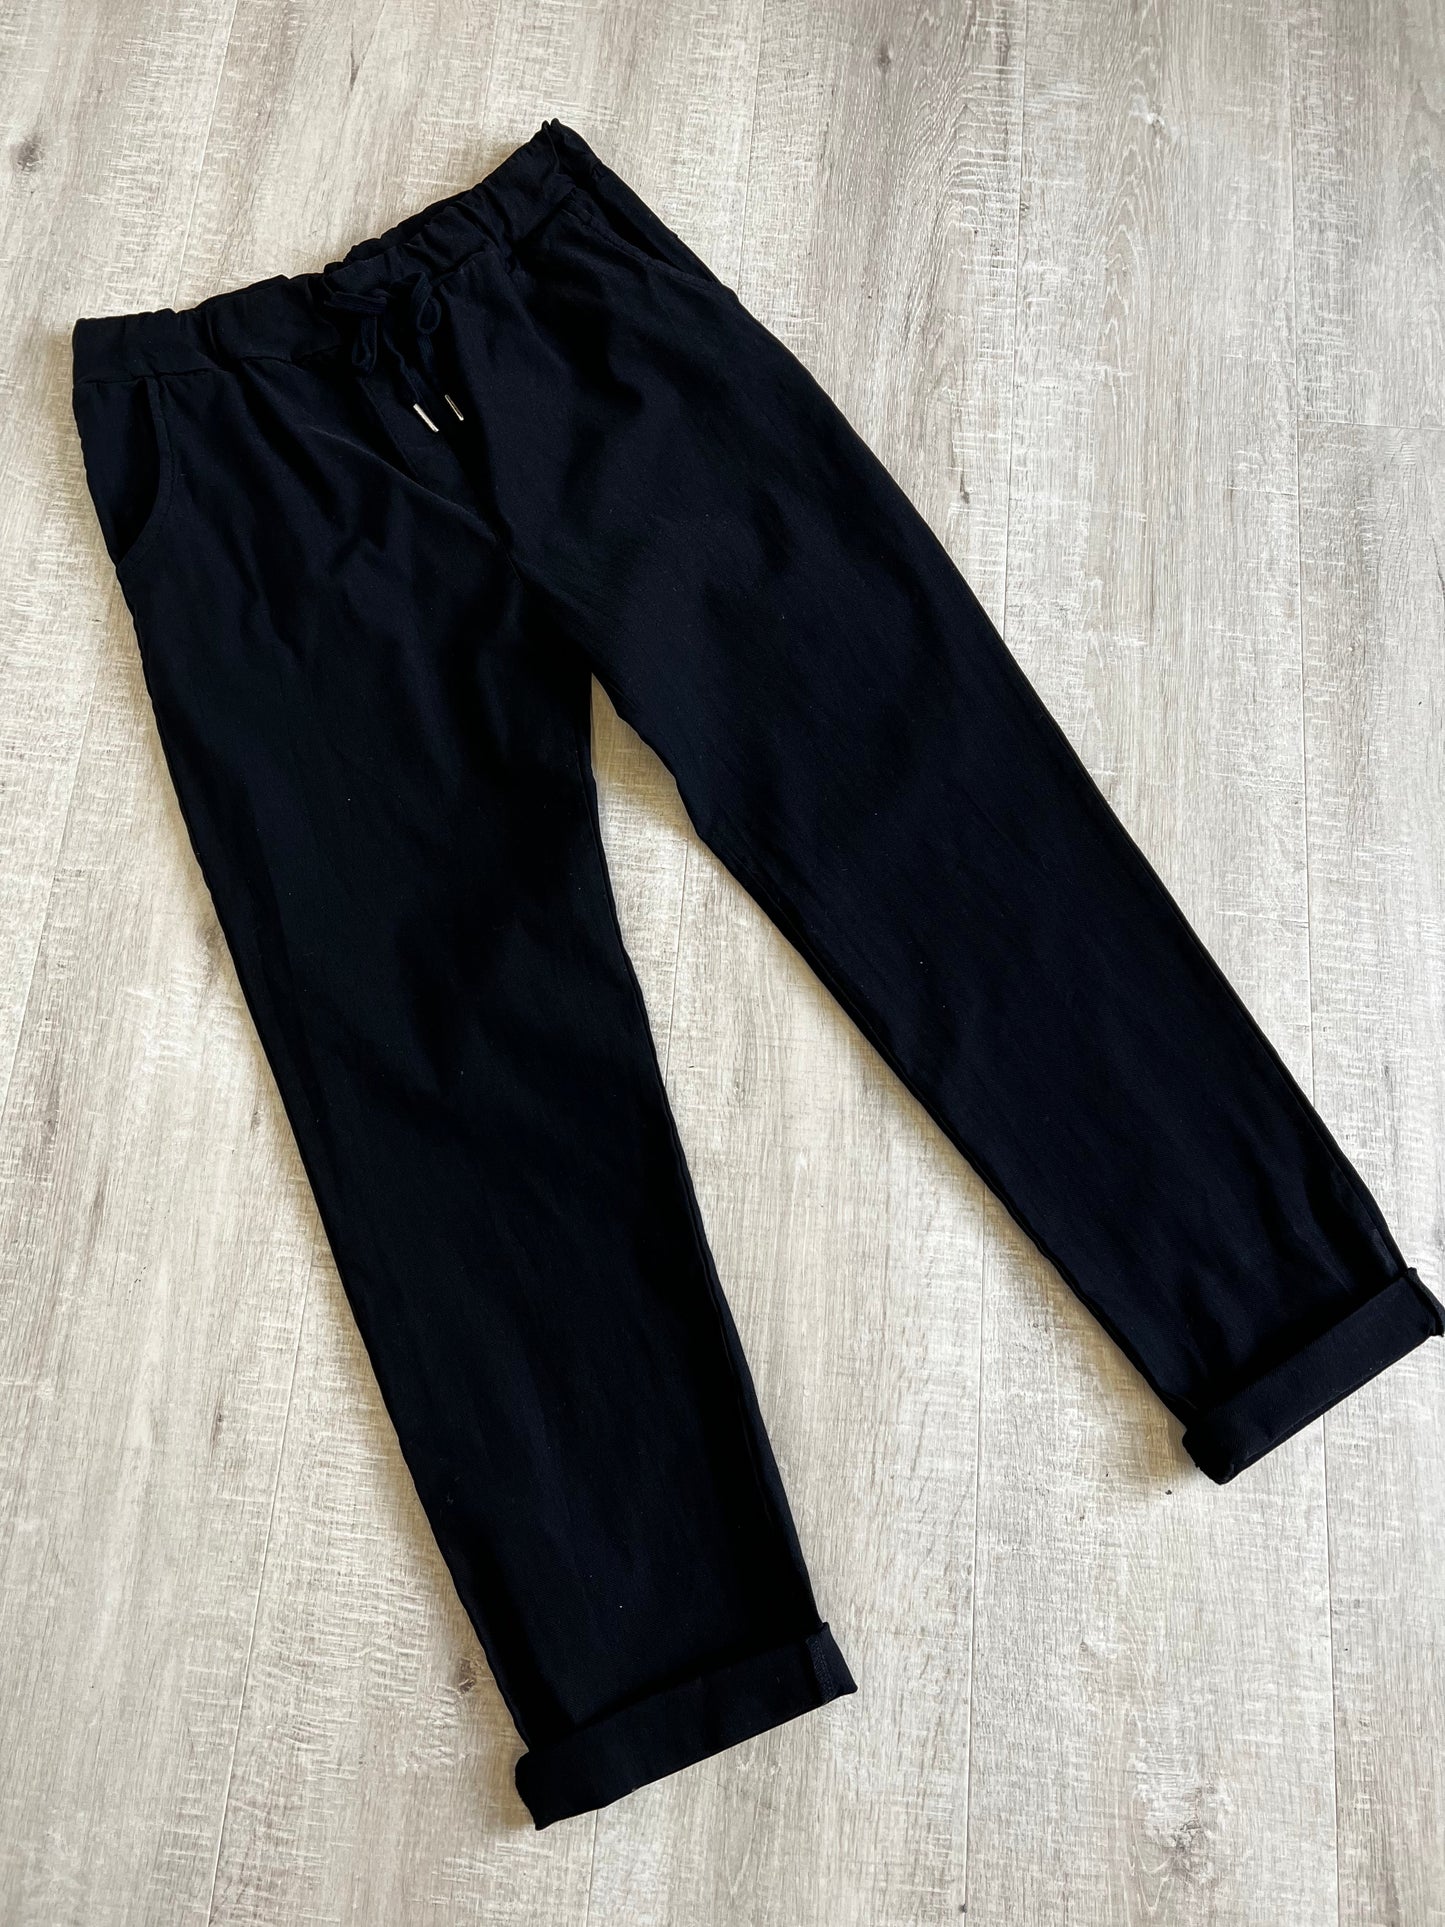 Plus size black smooth super stretchy trousers 18-22